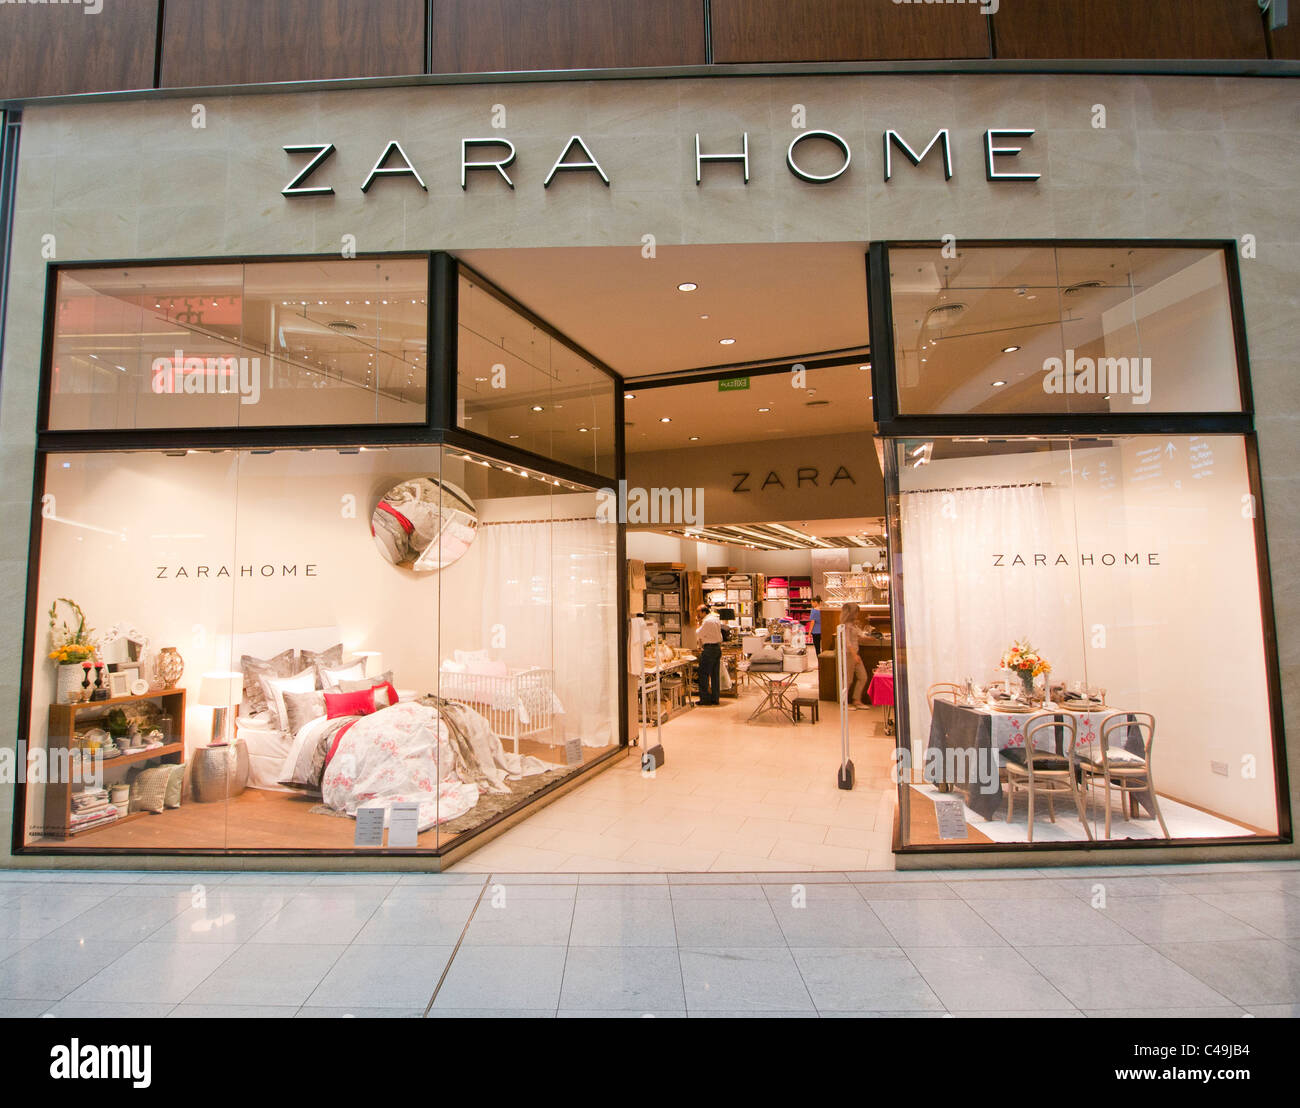 Zara Home High Resolution Stock Photography and Images - Alamy